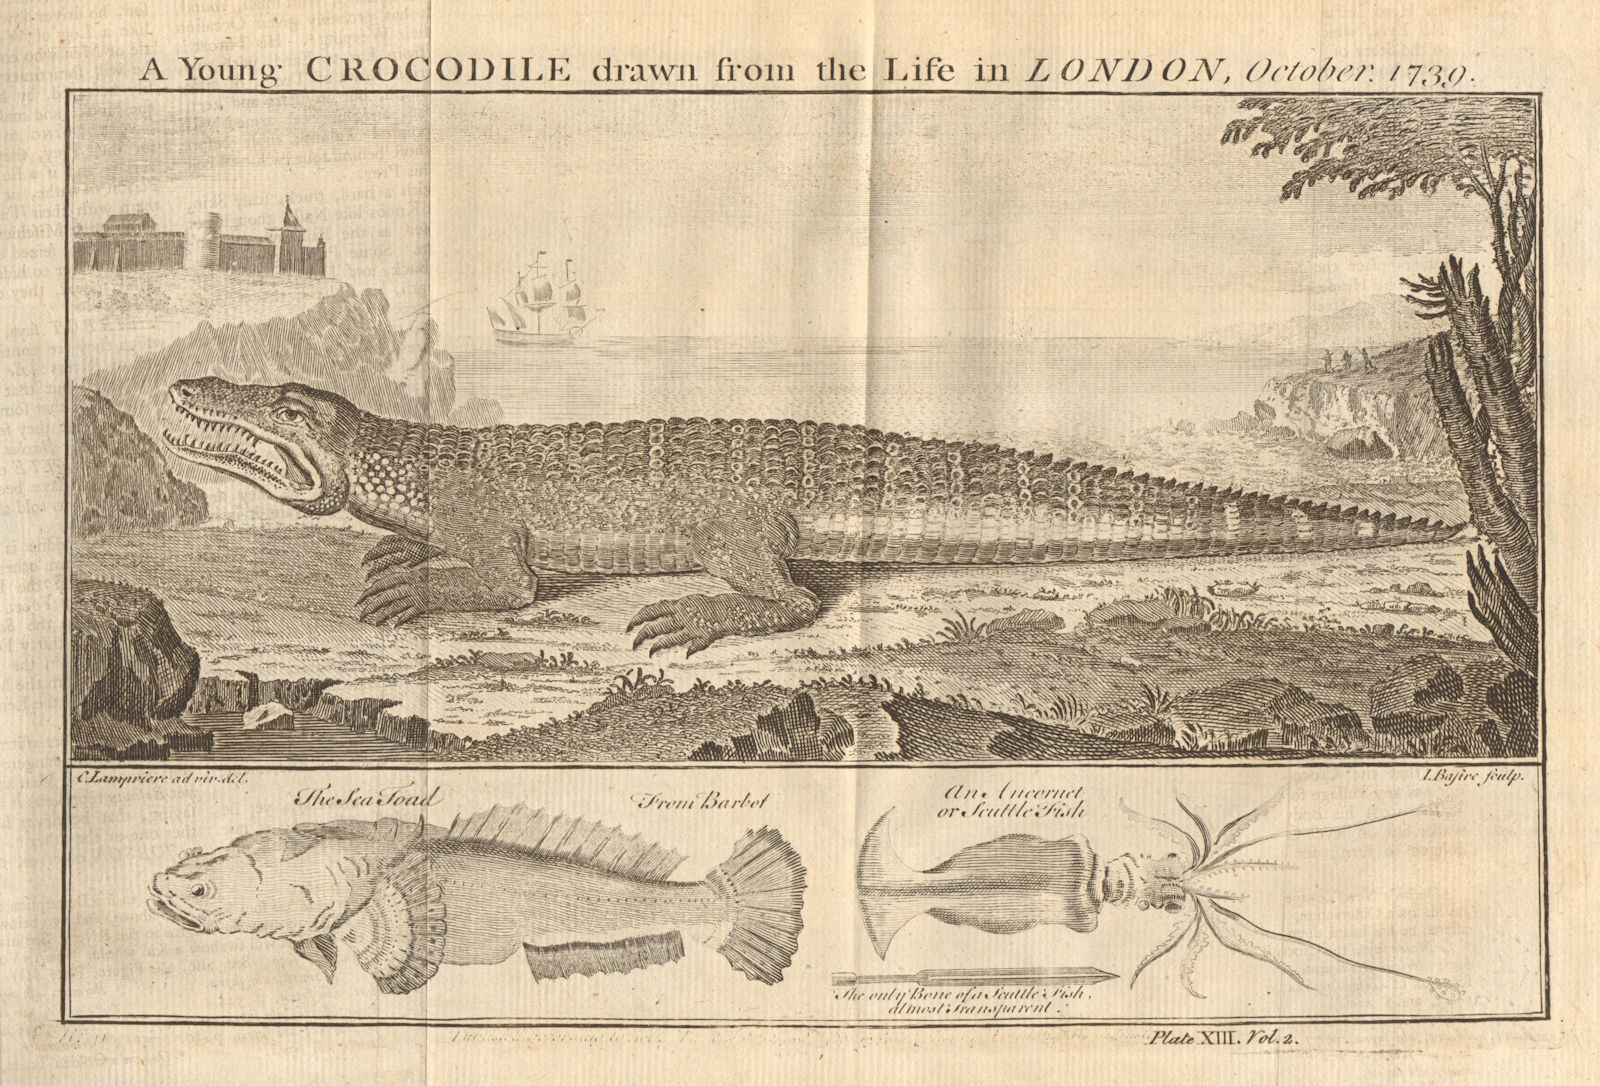 Young Crocodile, drawn in London 1739. Sea toad. Cuttlefish. West Africa 1745